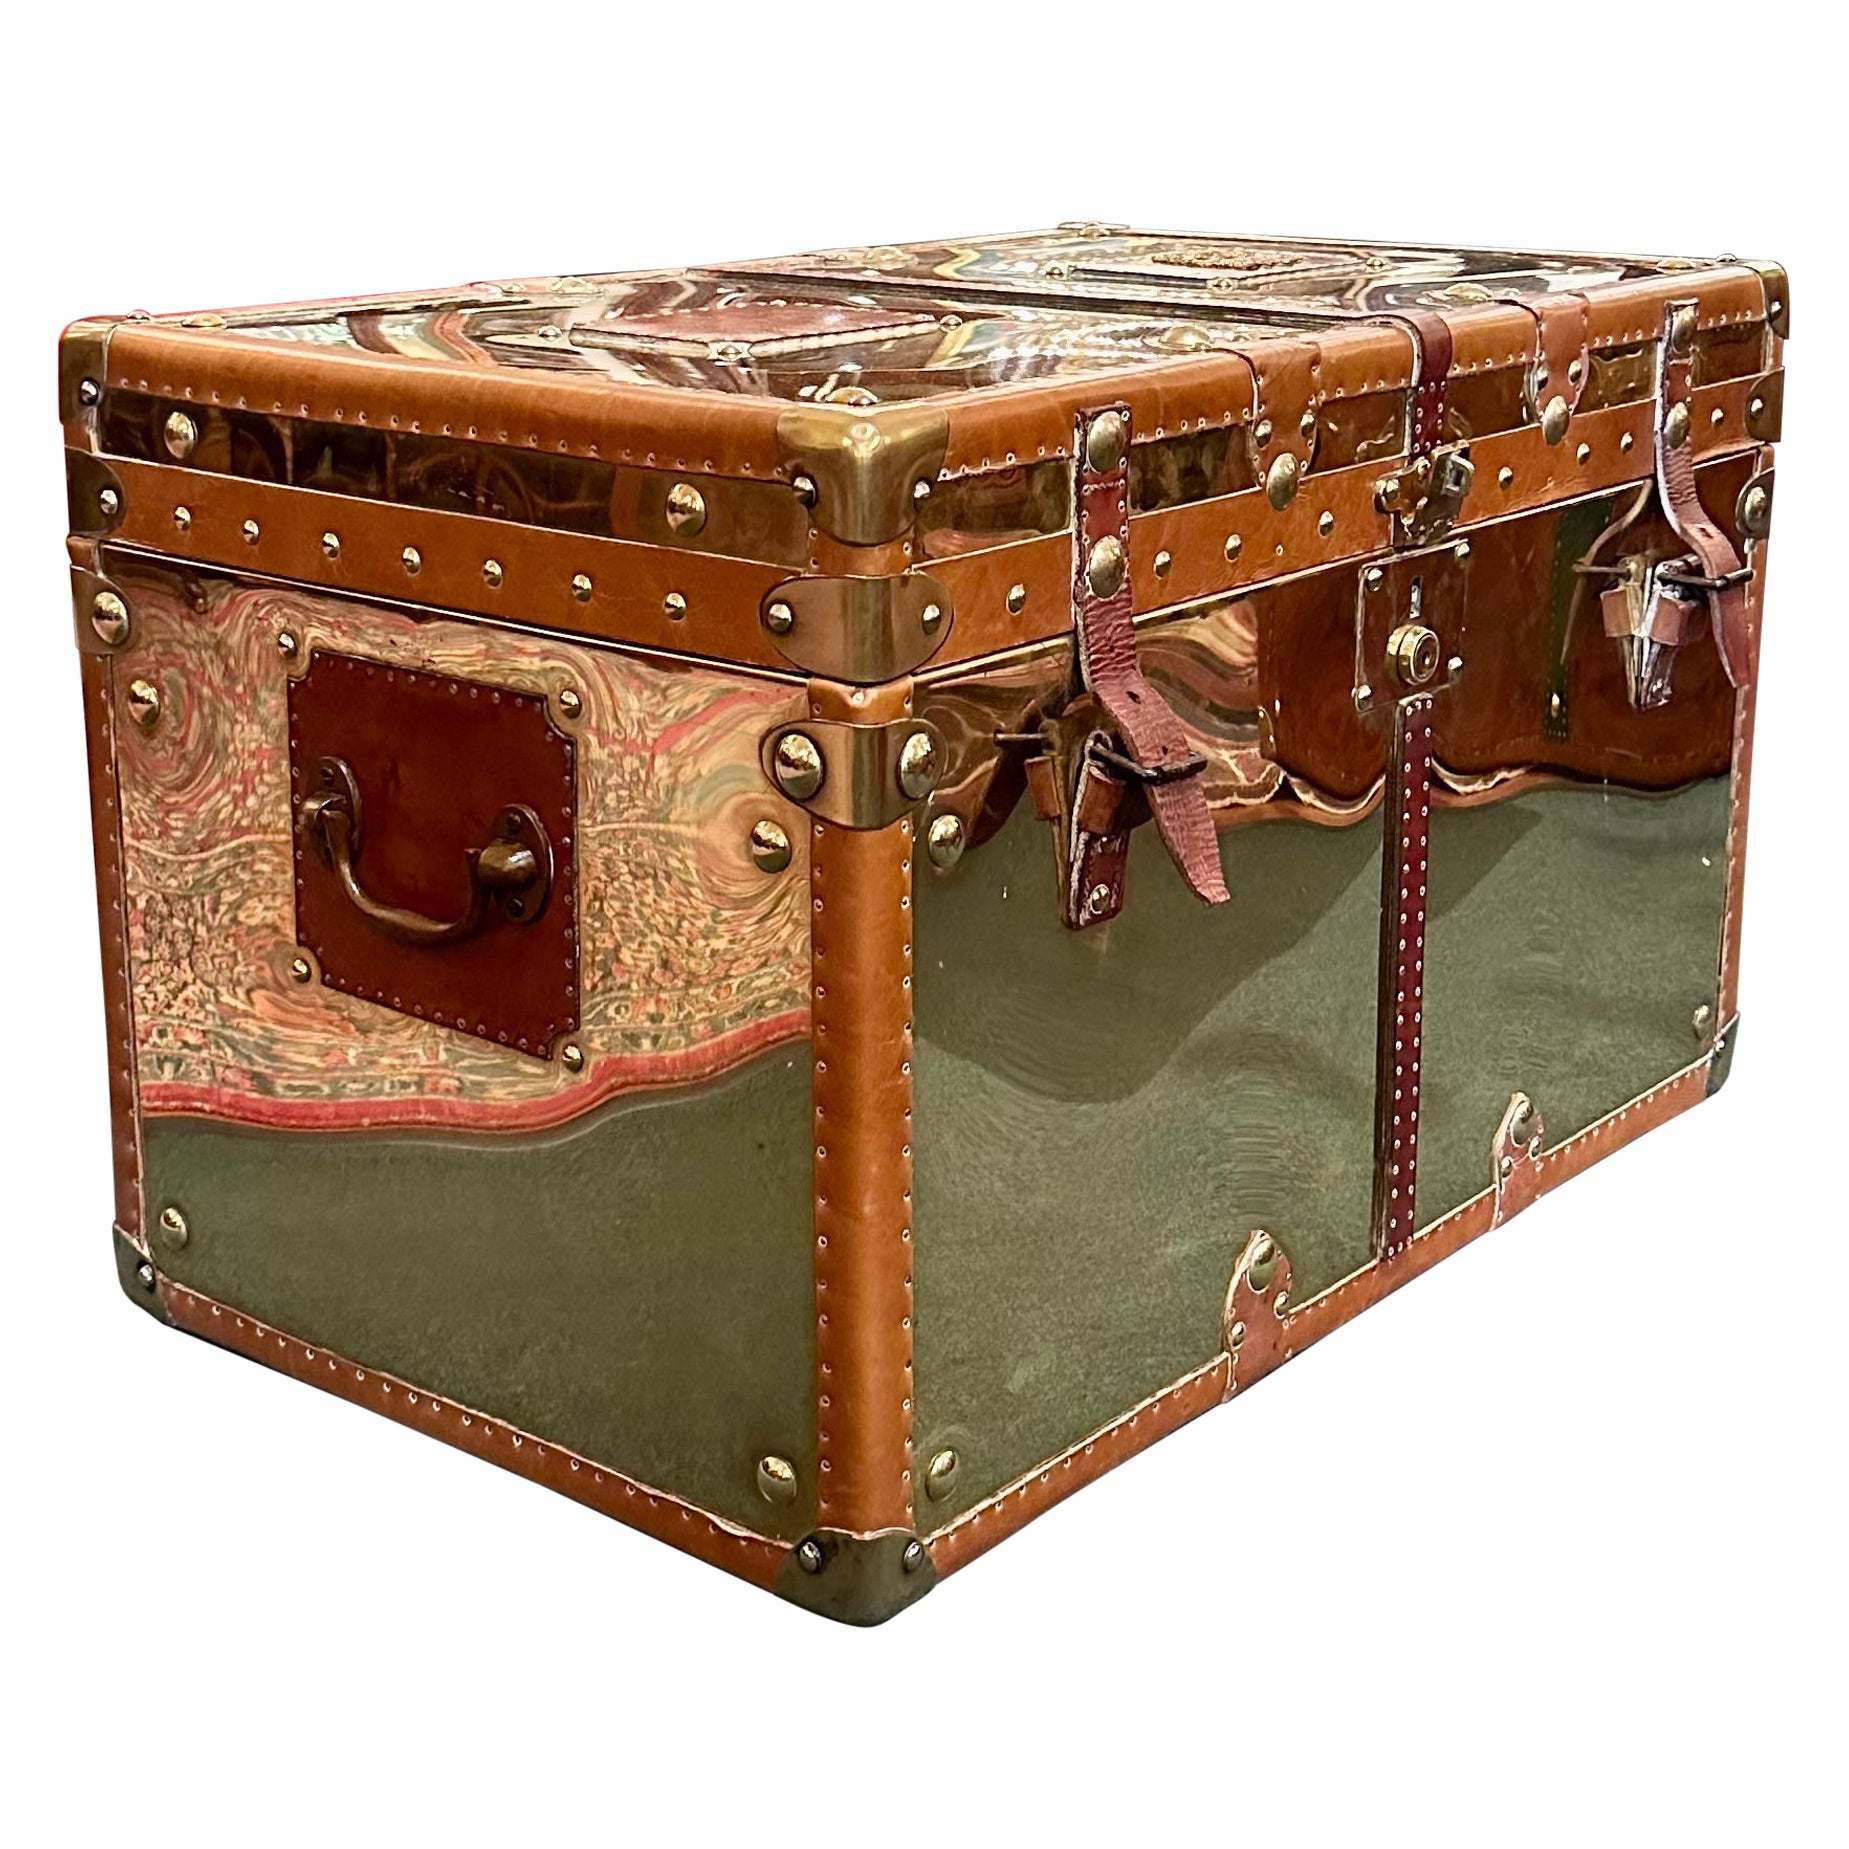 Large Antique British Leather & Brass Military Trunk, Circa 1910's-1920's.